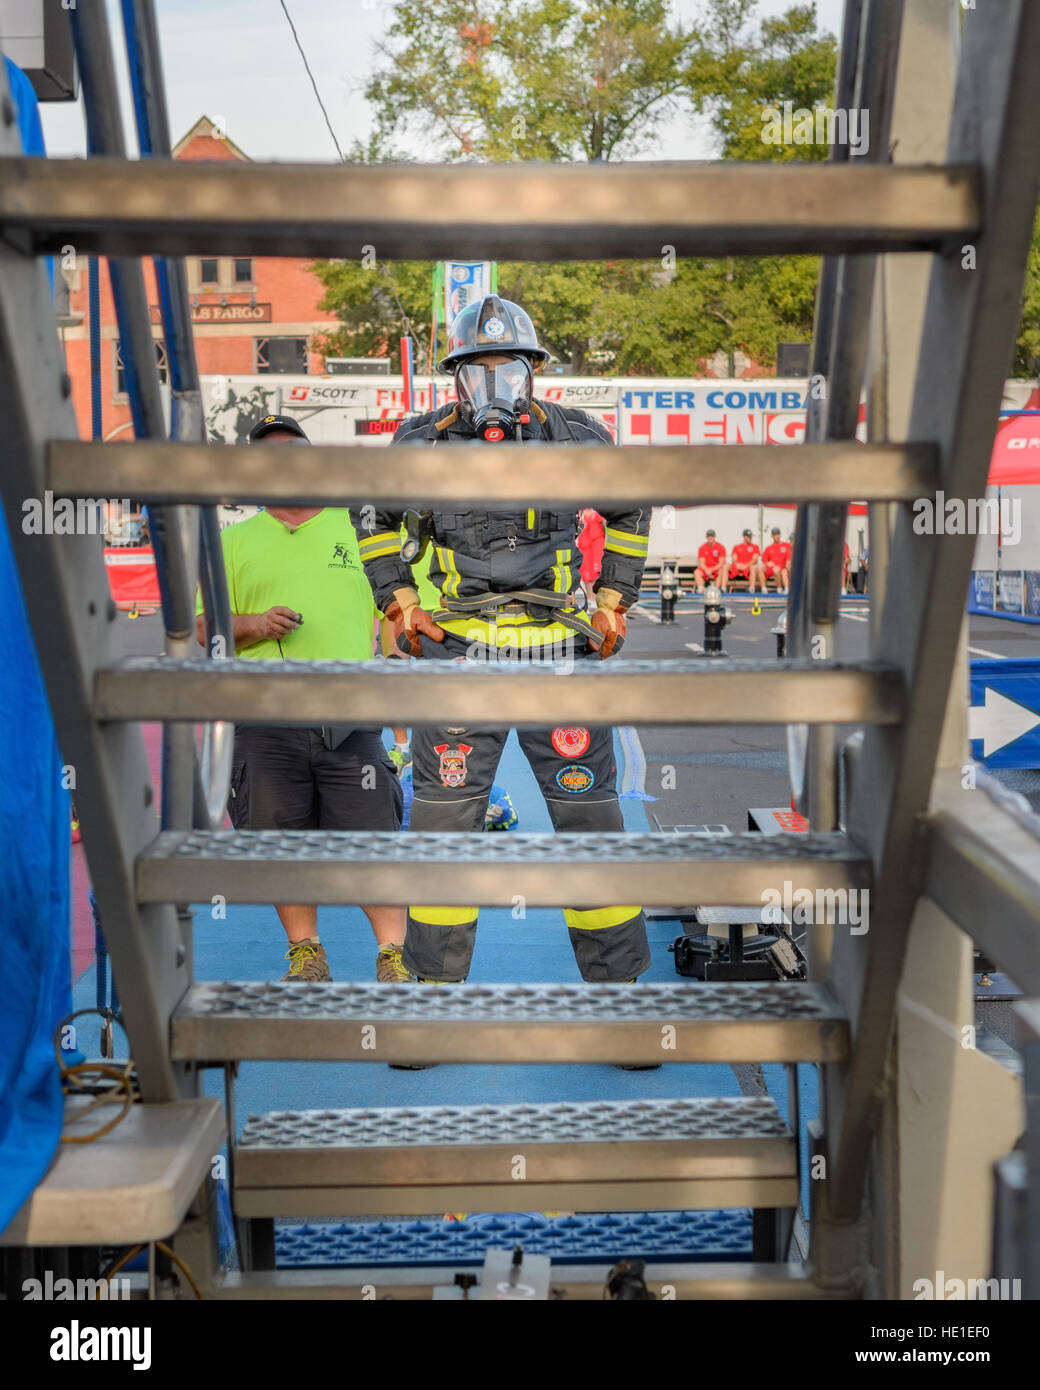 A firefighter waiting to climb a four story tower during competition. Stock Photo